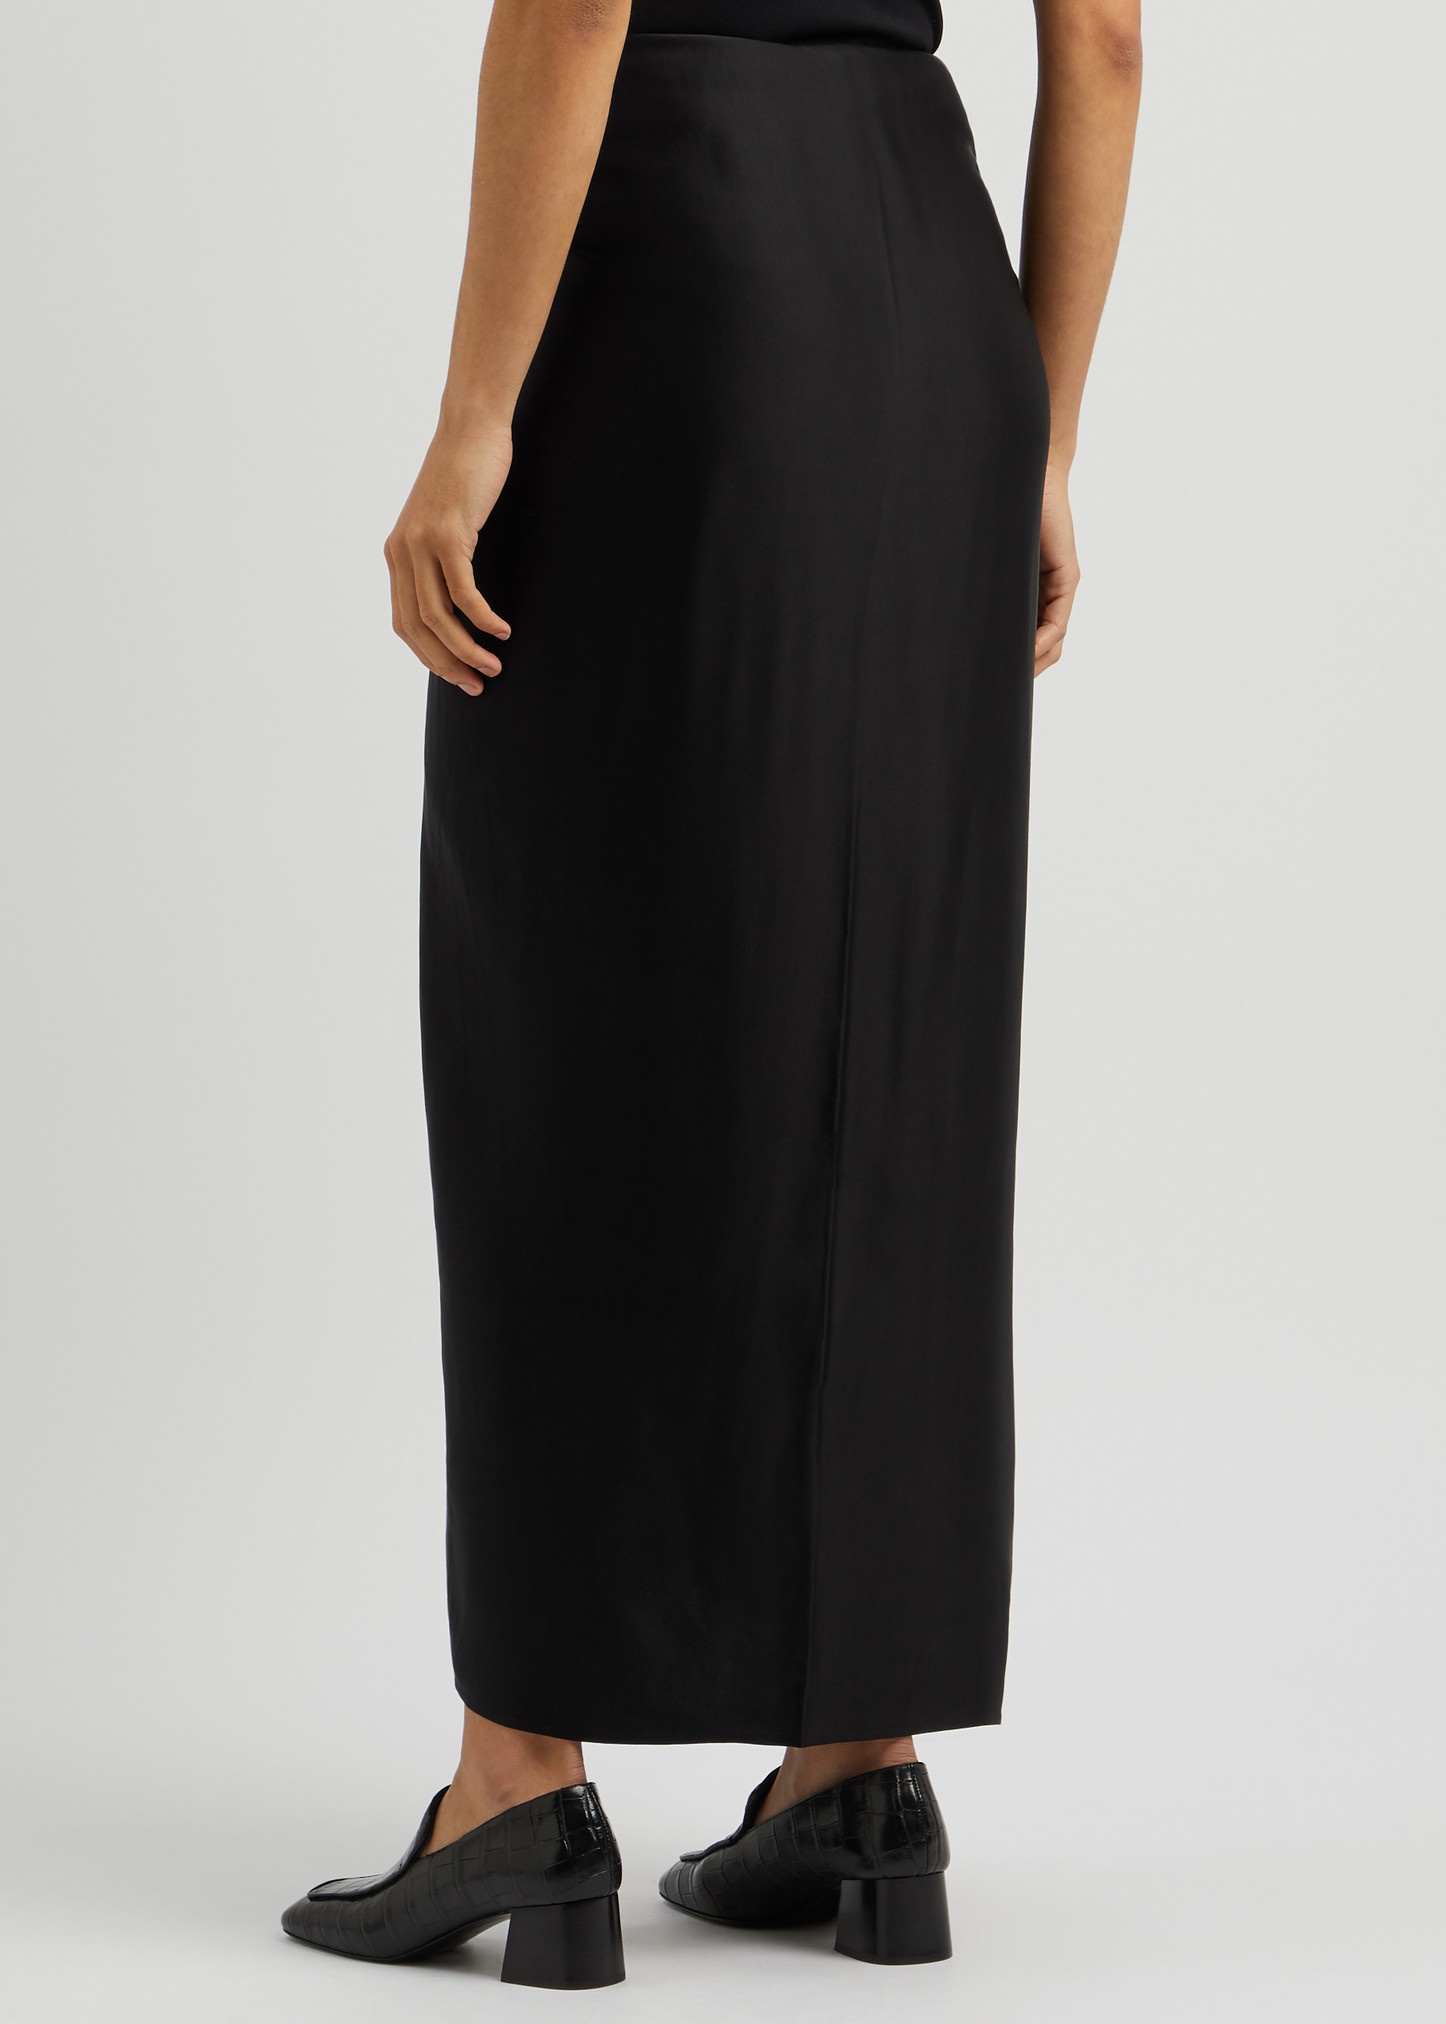 Knotted satin maxi skirt - 3